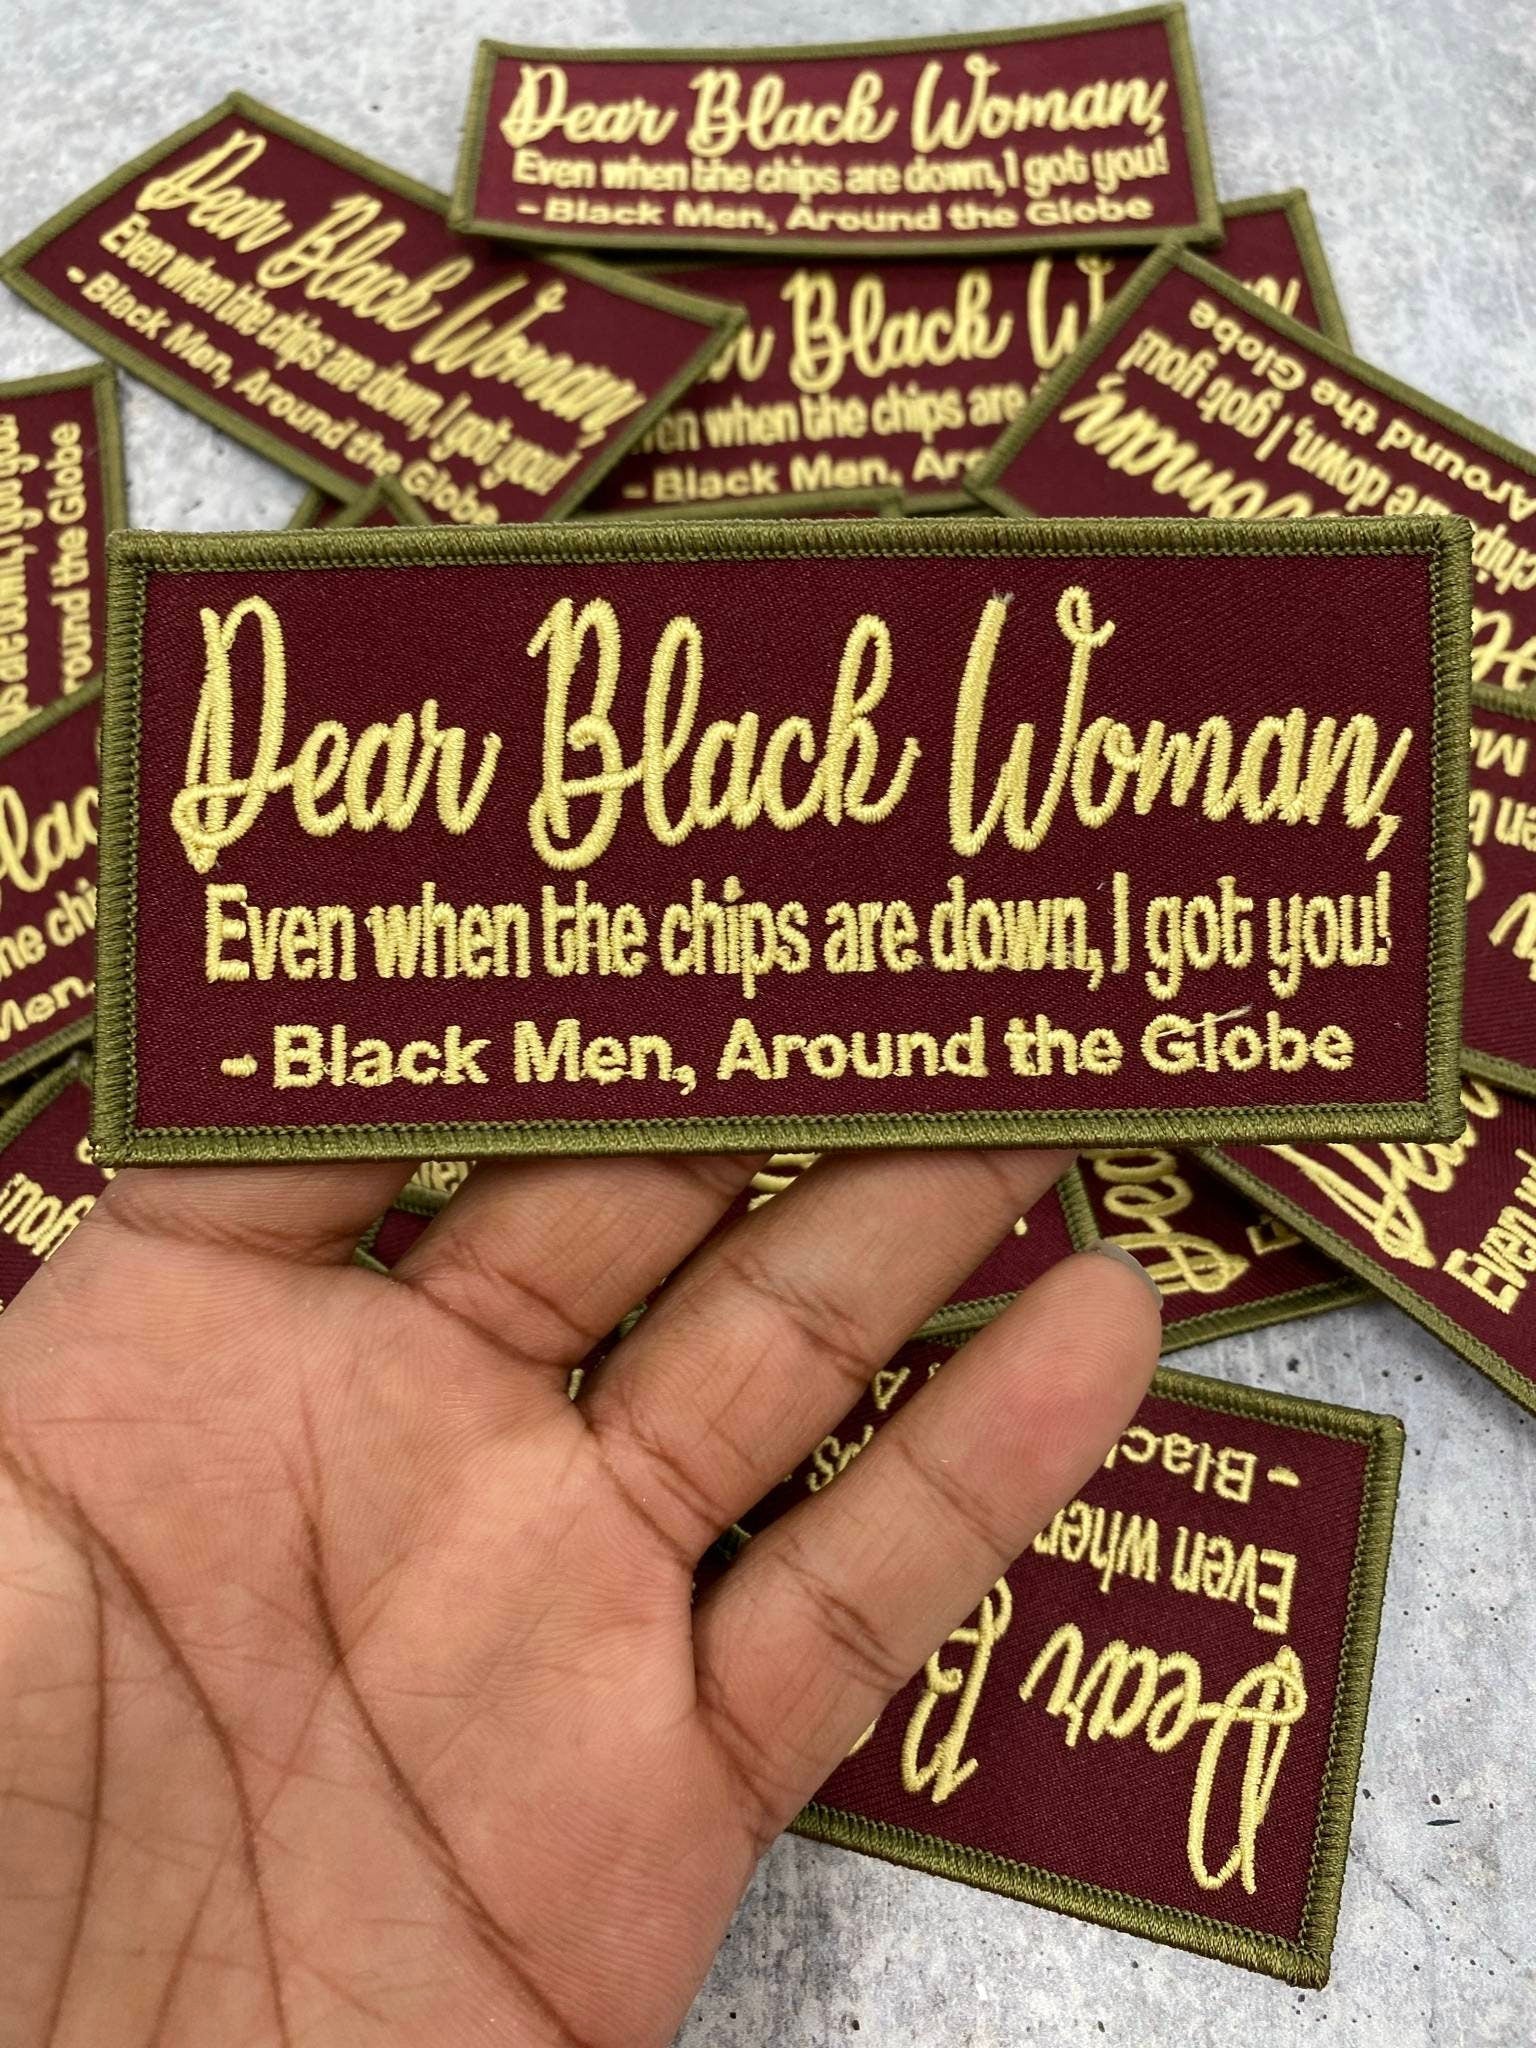 Exclusive, "Dear Black Woman" Iron-on Embroidered Patch,  Statement Patch for Clothing and Accessories, Size 5"x2", Black Unity Patch, DIY